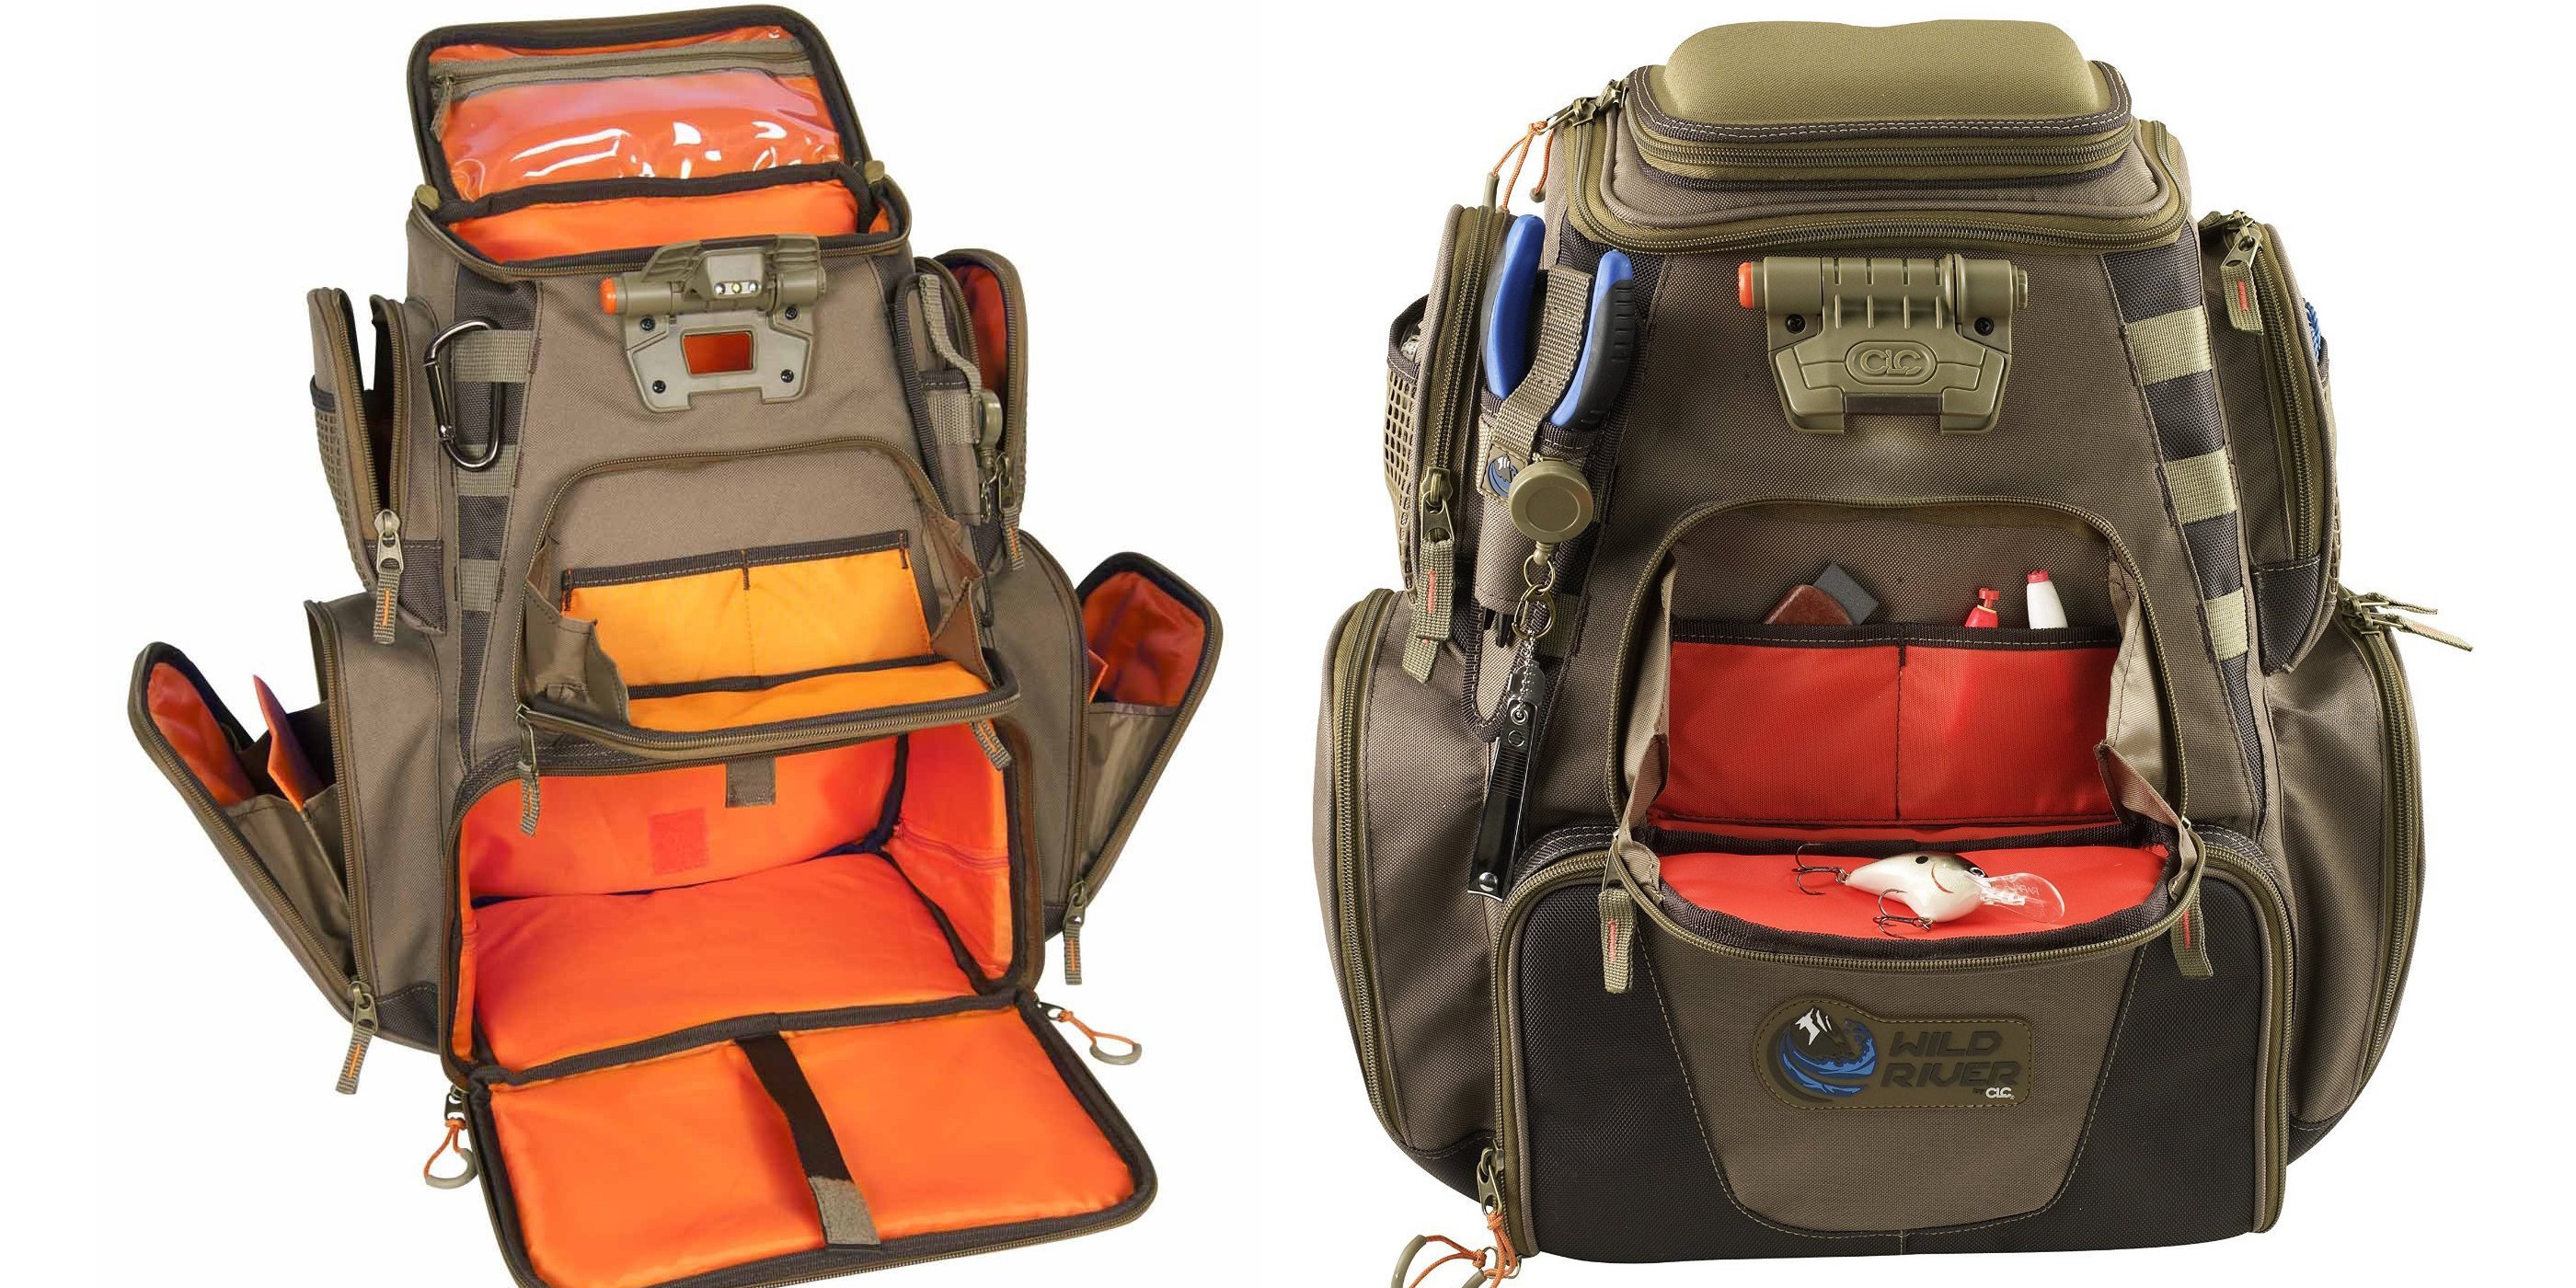 https://9to5toys.com/wp-content/uploads/sites/5/2016/05/wild-river-by-clc-tackle-tek-nomad-lighted-backpack-wn3604-4.jpg